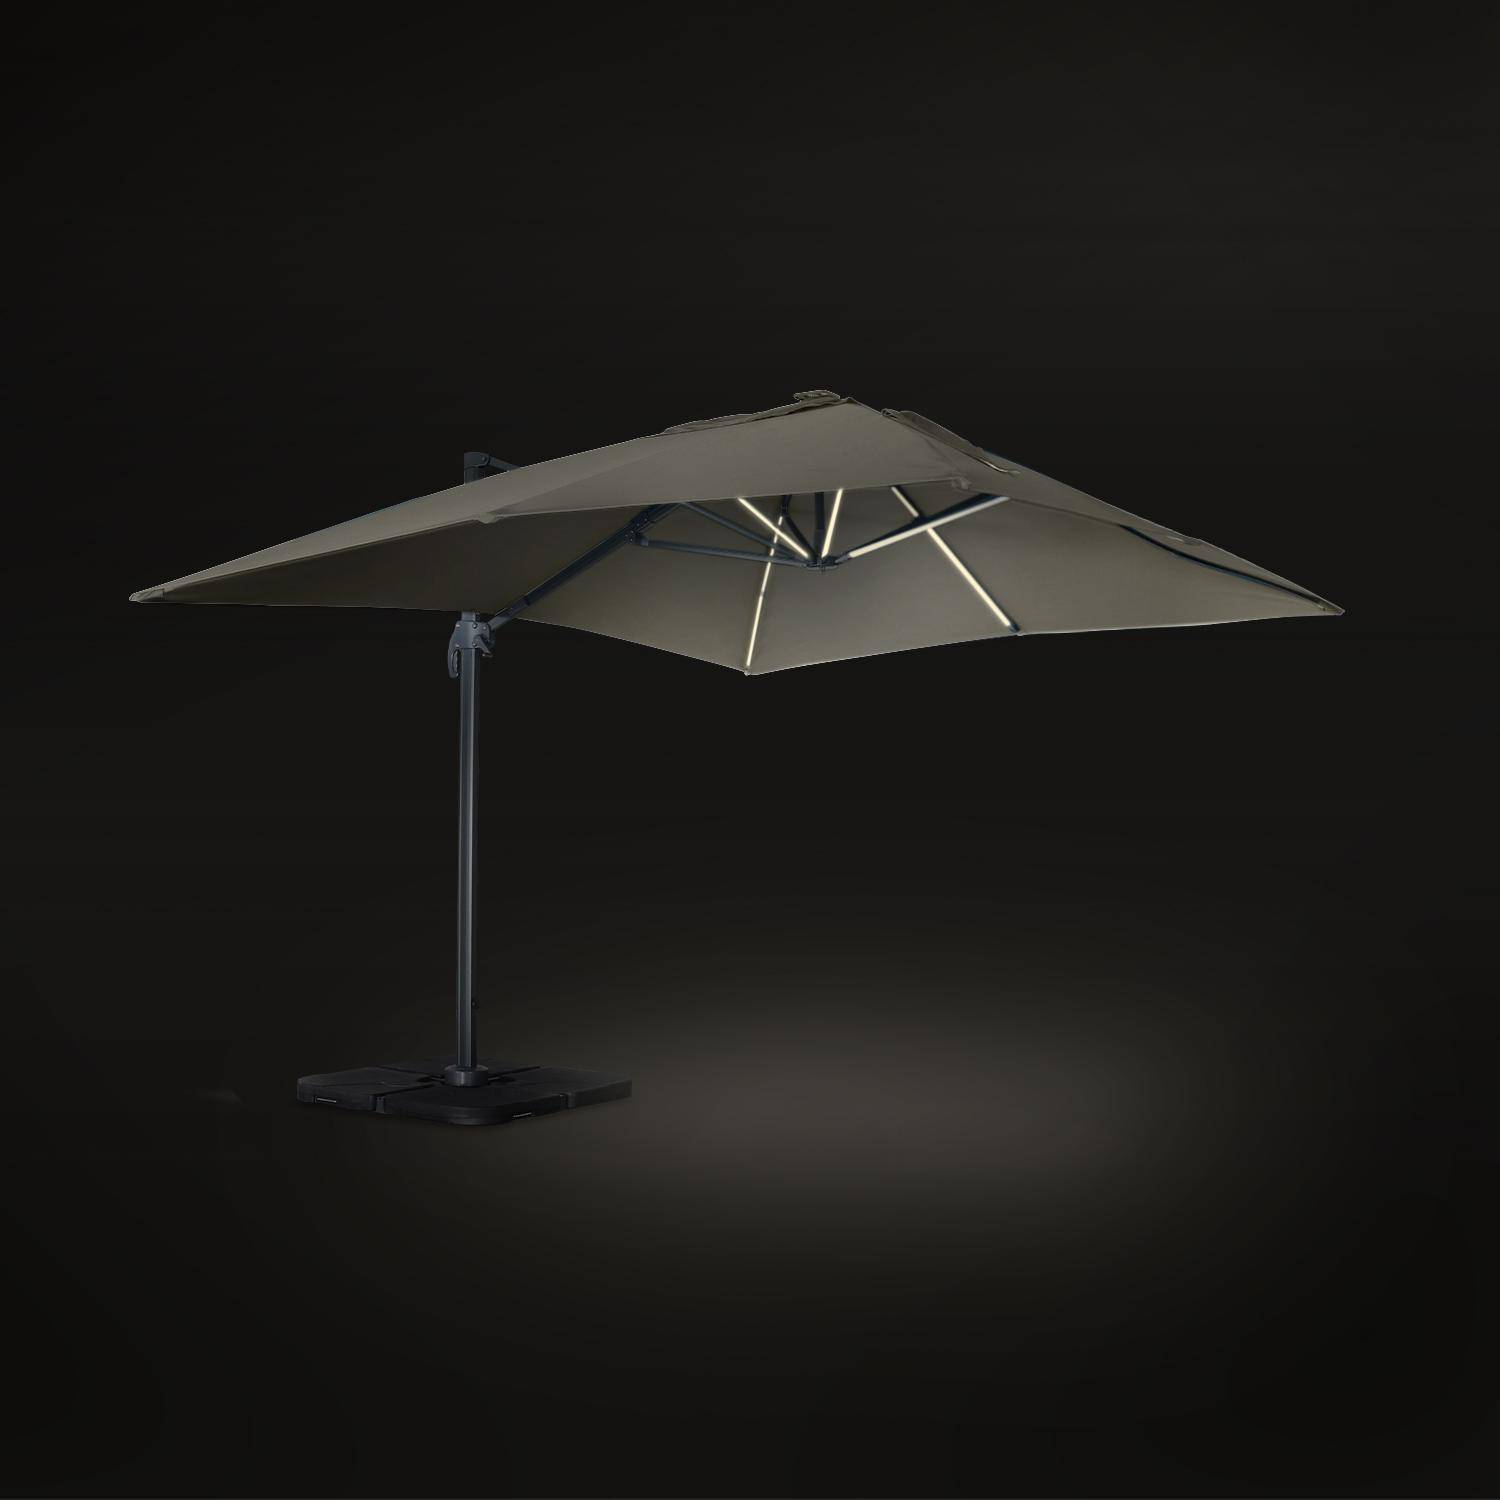 Premium quality rectangular 3x4m cantilever parasol with solar-powered integrated LED lights - Cantilever parasol, tiltable, foldable with 360° rotation, solar charging, cover included - Luce - Beige,sweeek,Photo4